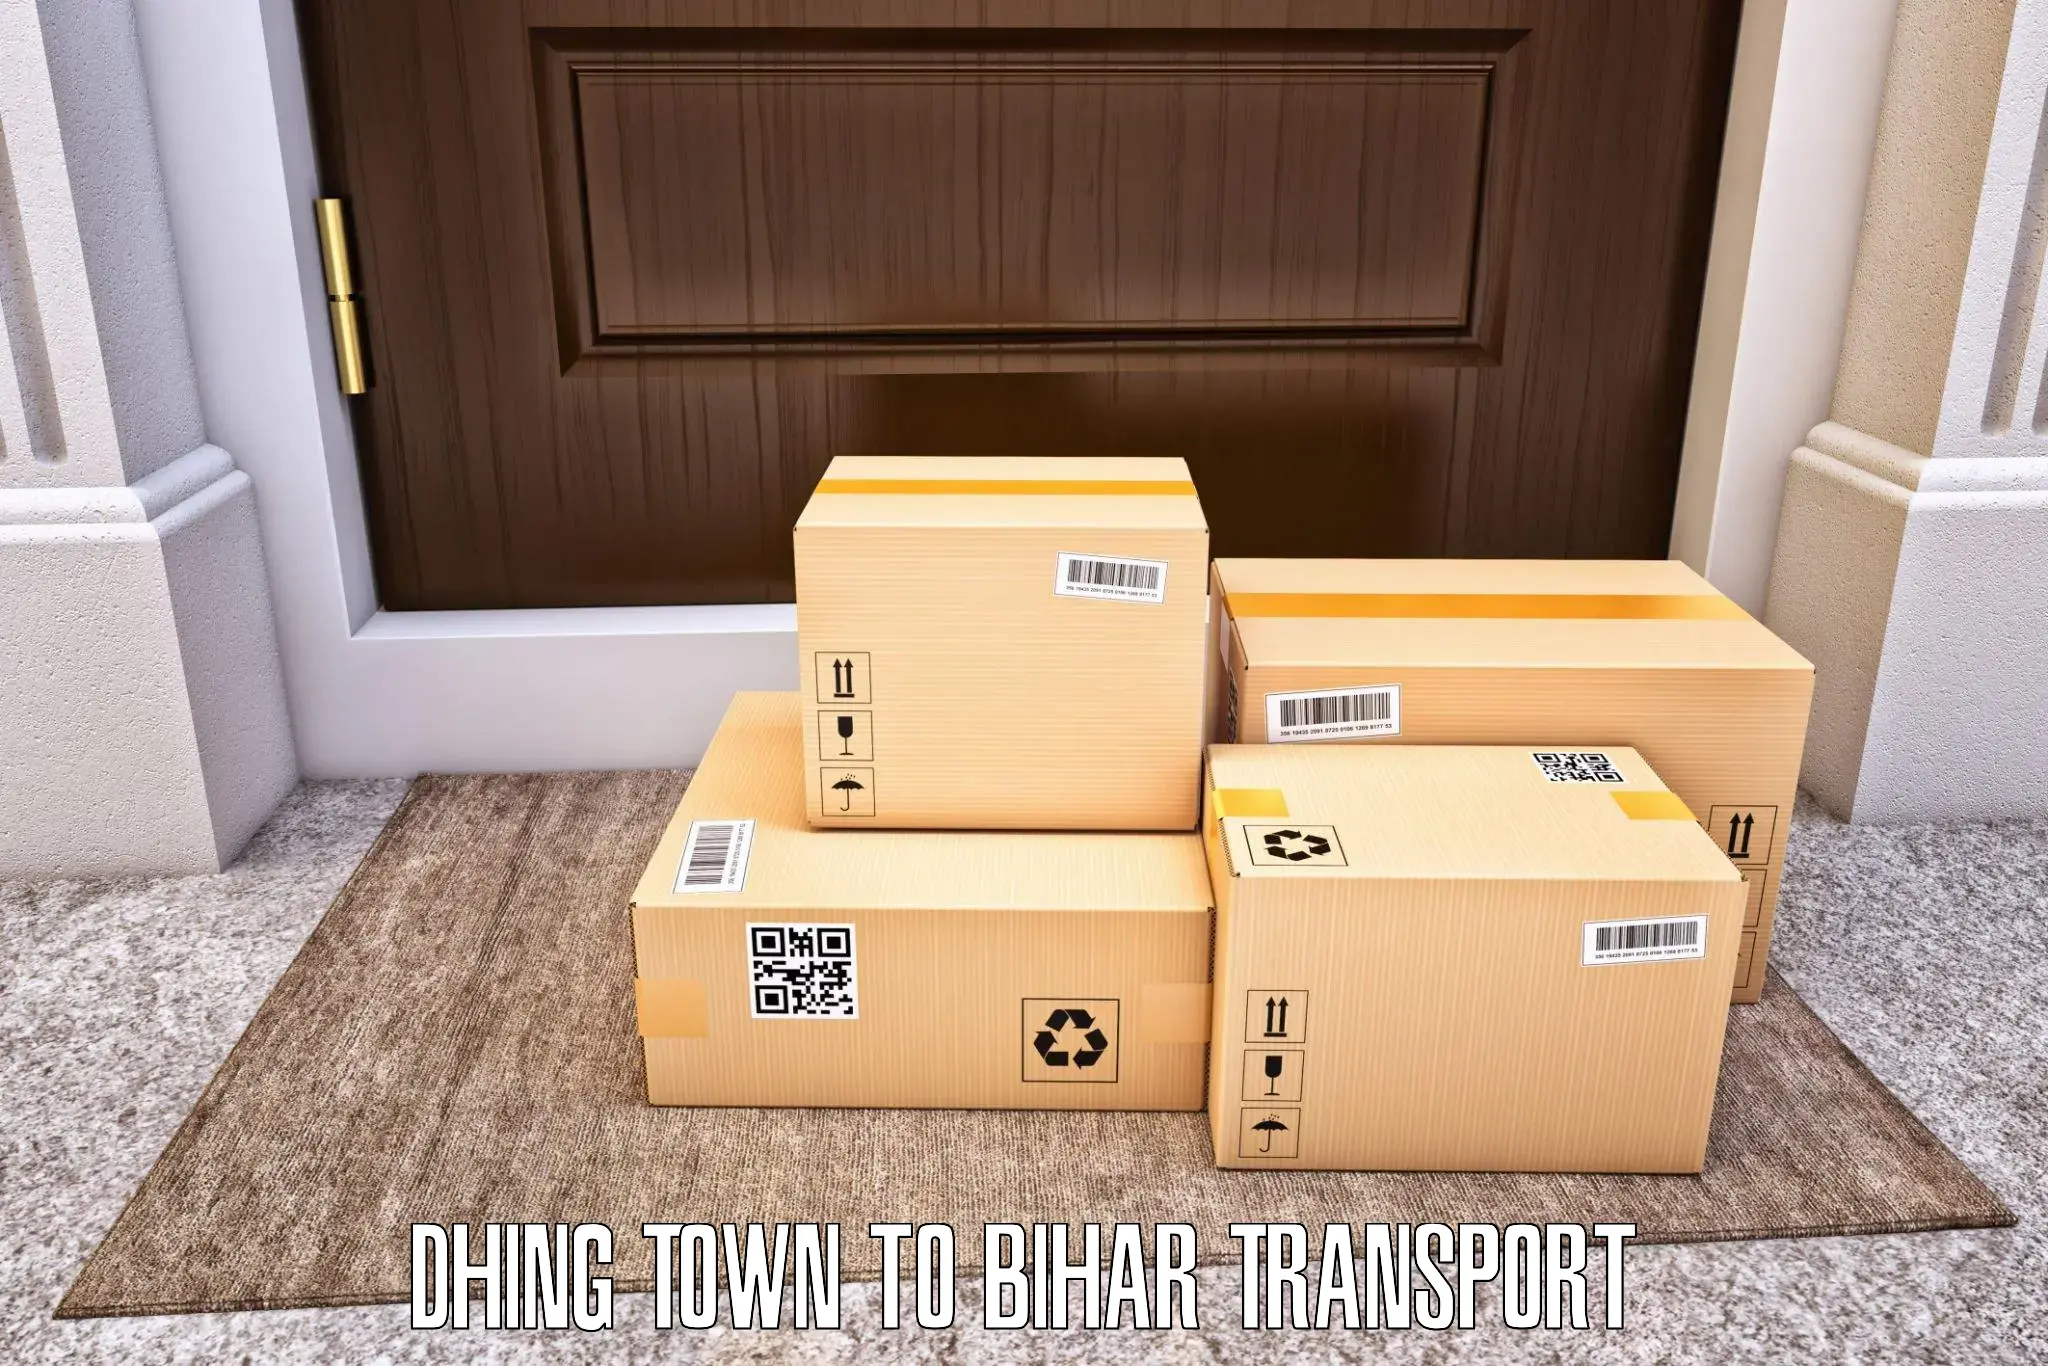 Vehicle transport services Dhing Town to Dehri